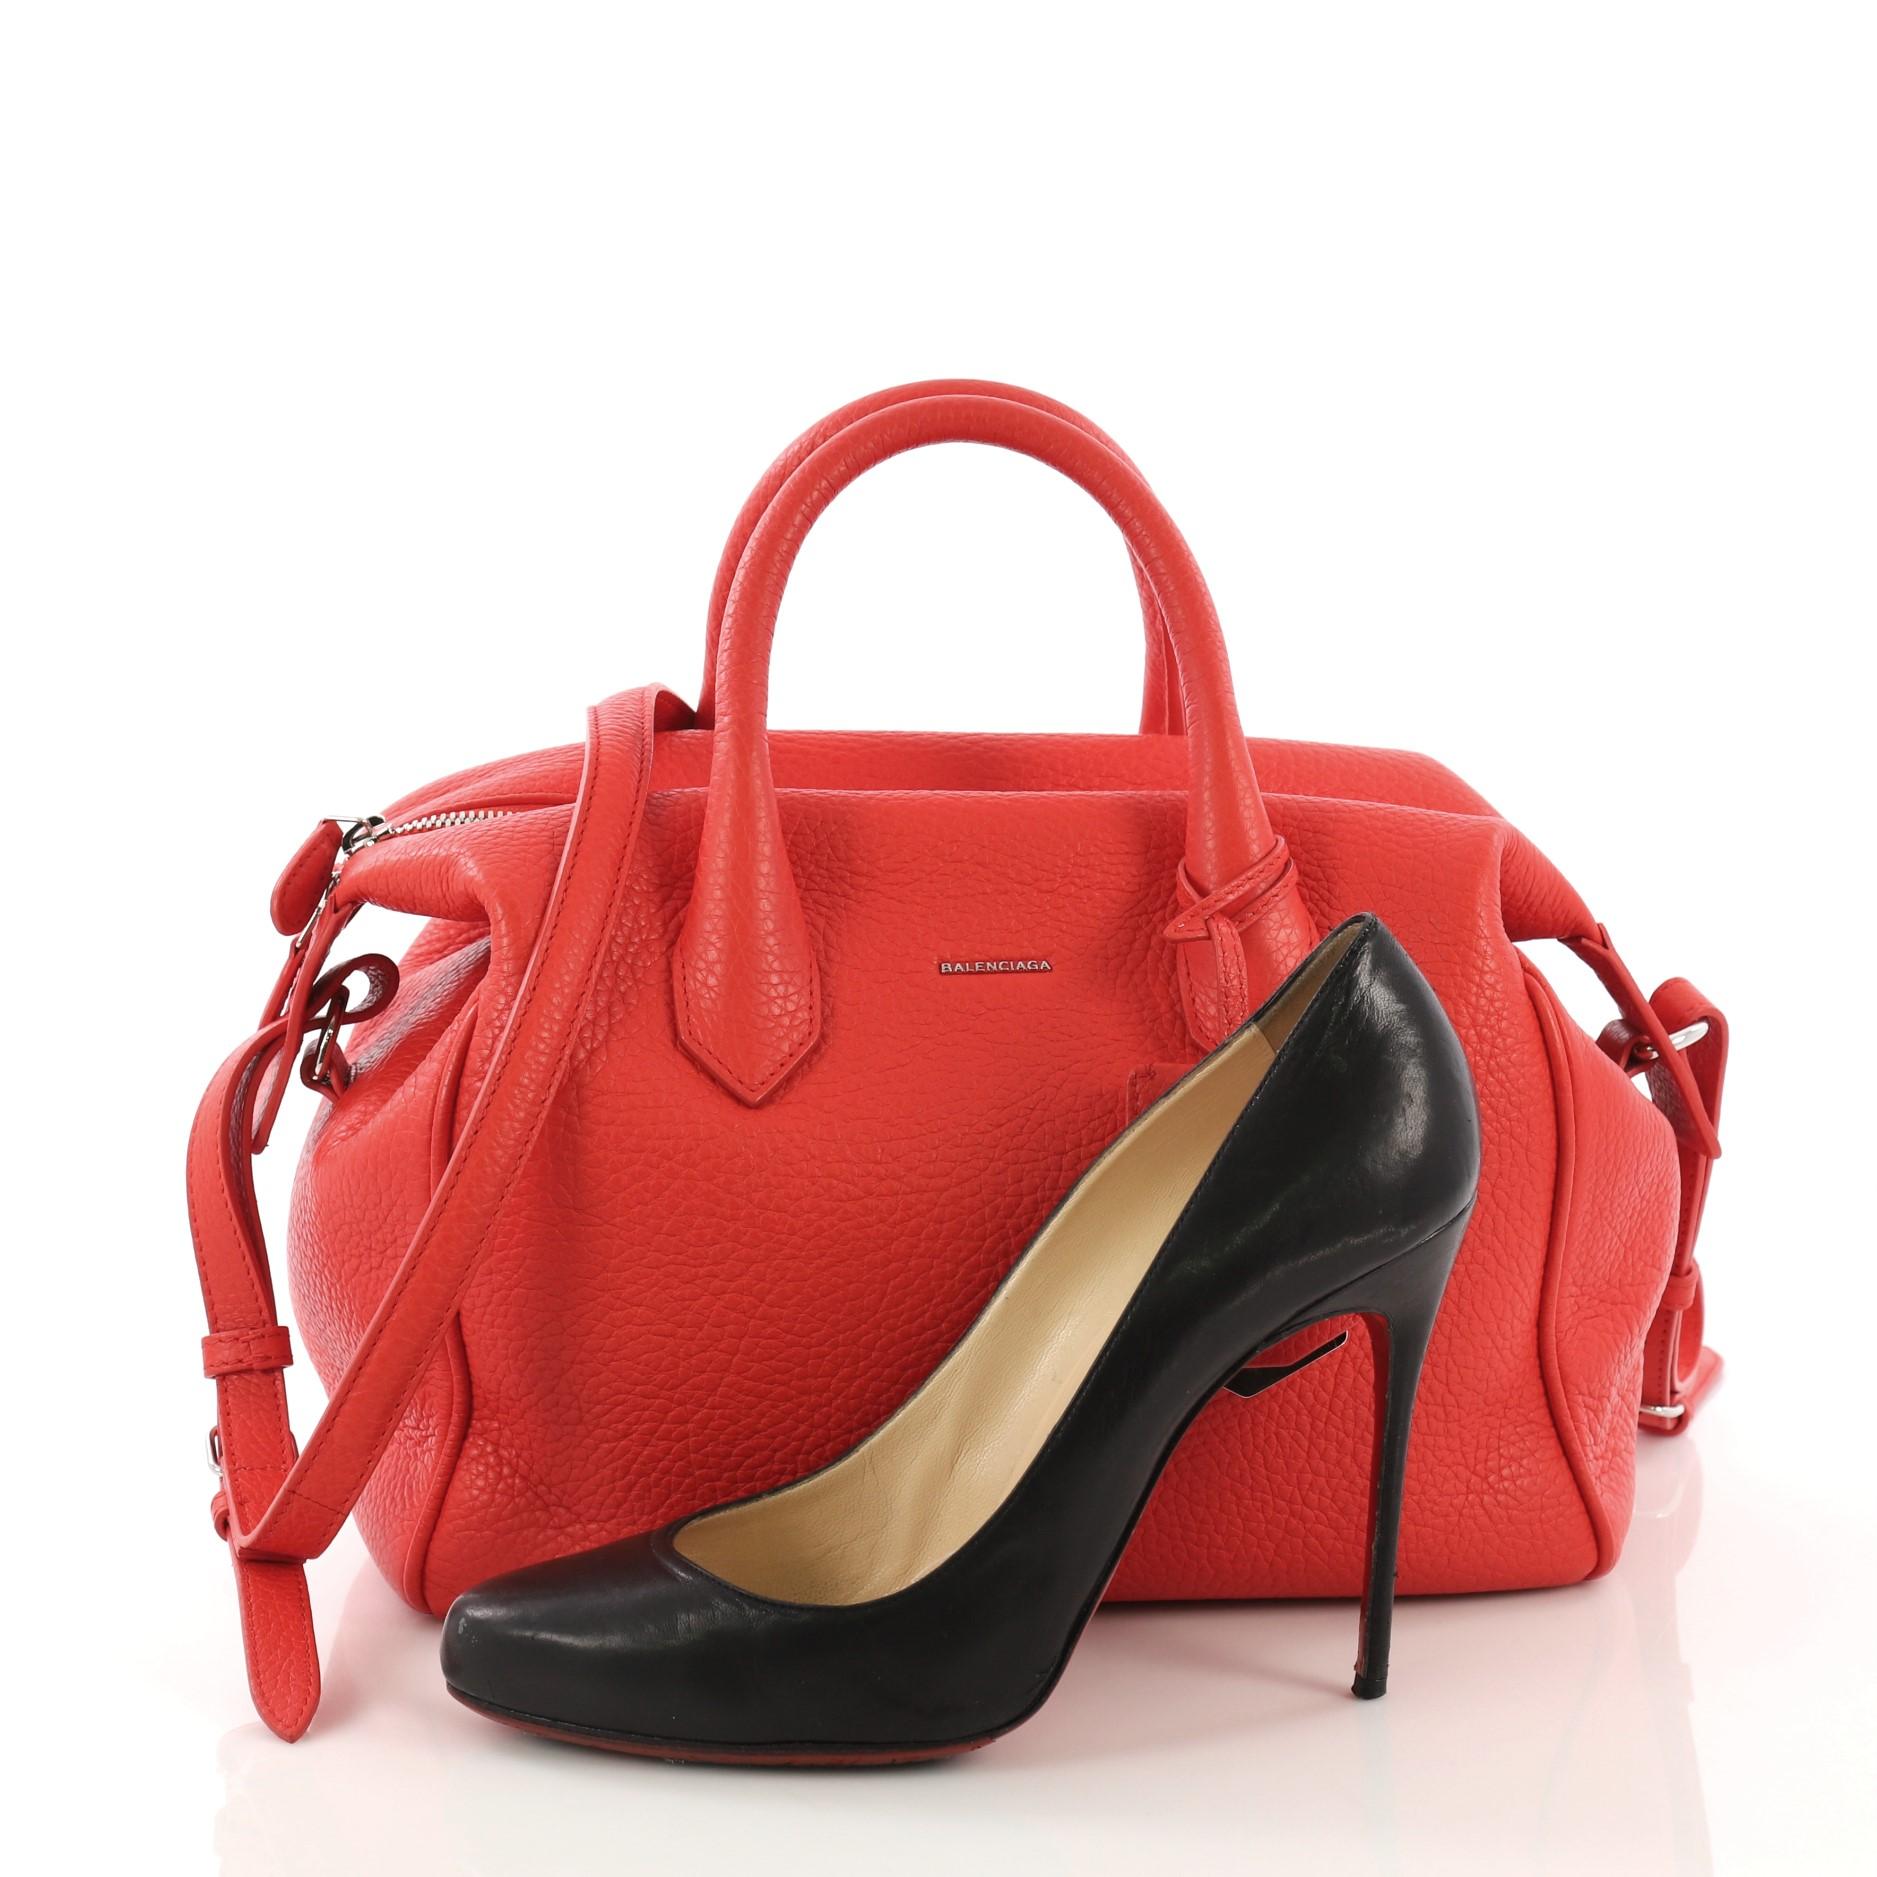 This Balenciaga Infanta Boston Bag Leather Small, crafted from red leather, features dual rolled handles, raised logo at its front, and silver-tone hardware. Its top zip closure opens to a black fabric interior with side zip pocket. **Note: Shoe